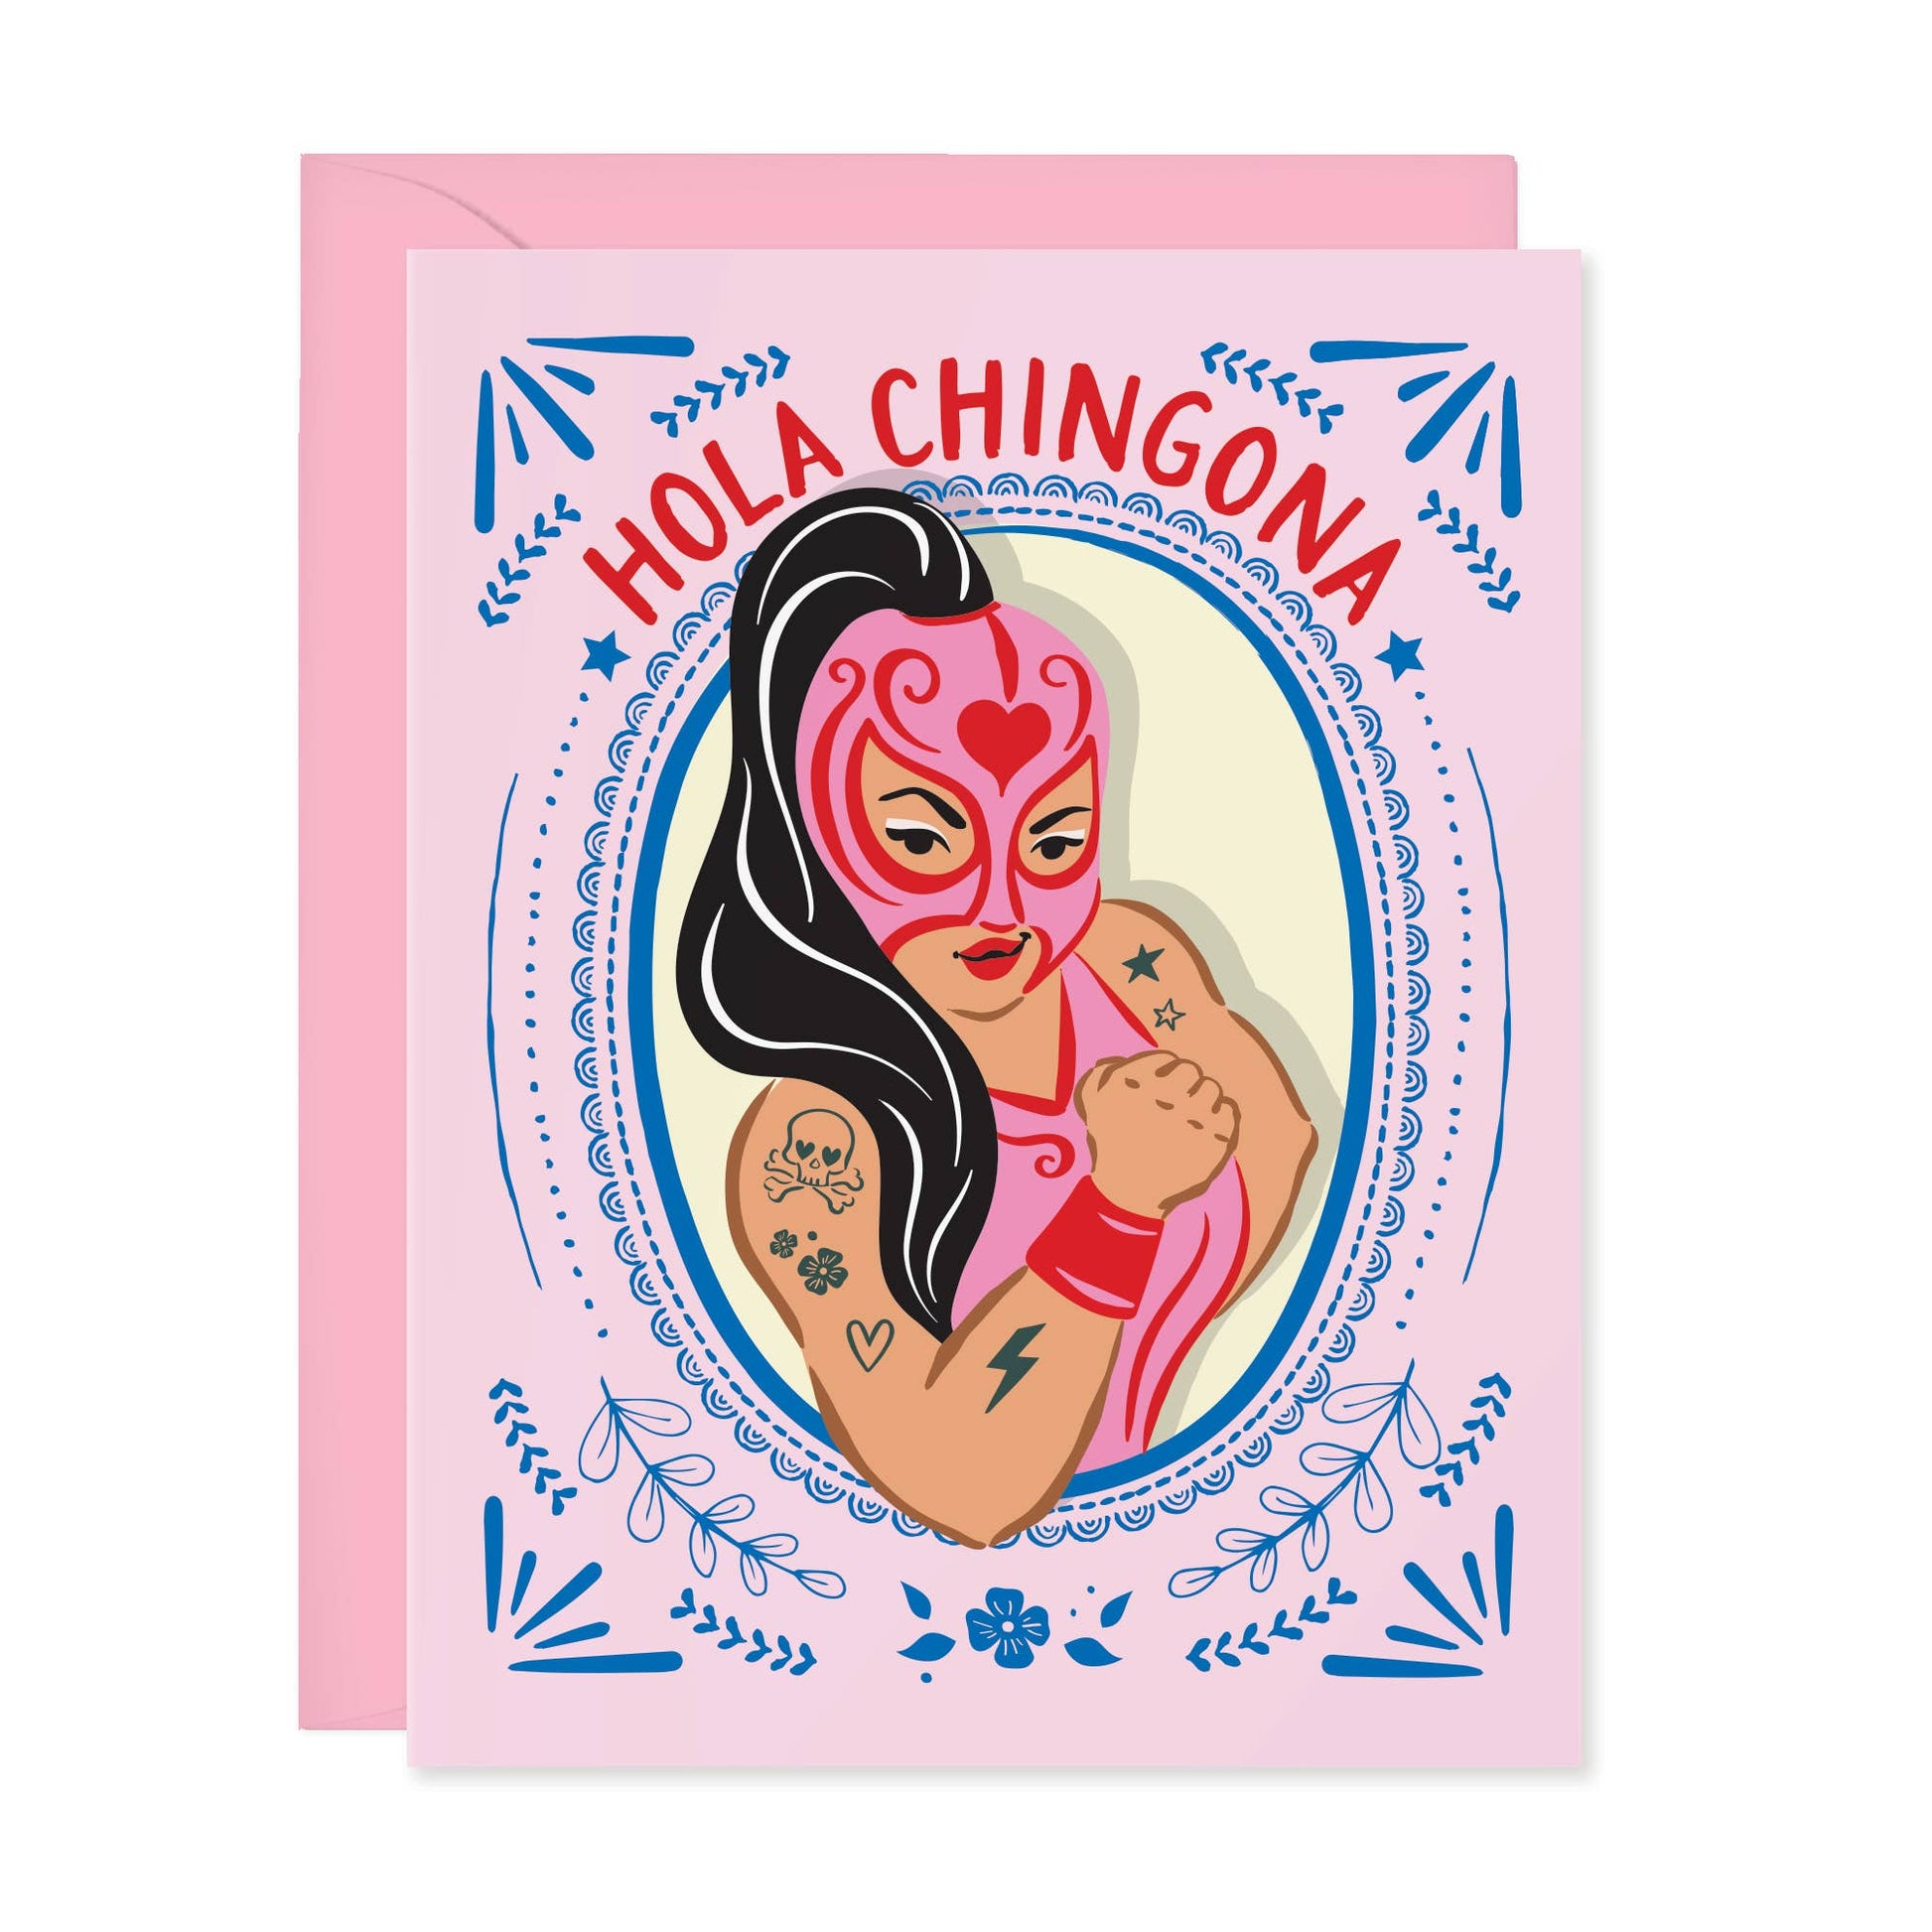 "Hola Chingona" featuring an artistic drawing of a tattooed, strong LatinX woman wearing a pink wrestling mask.